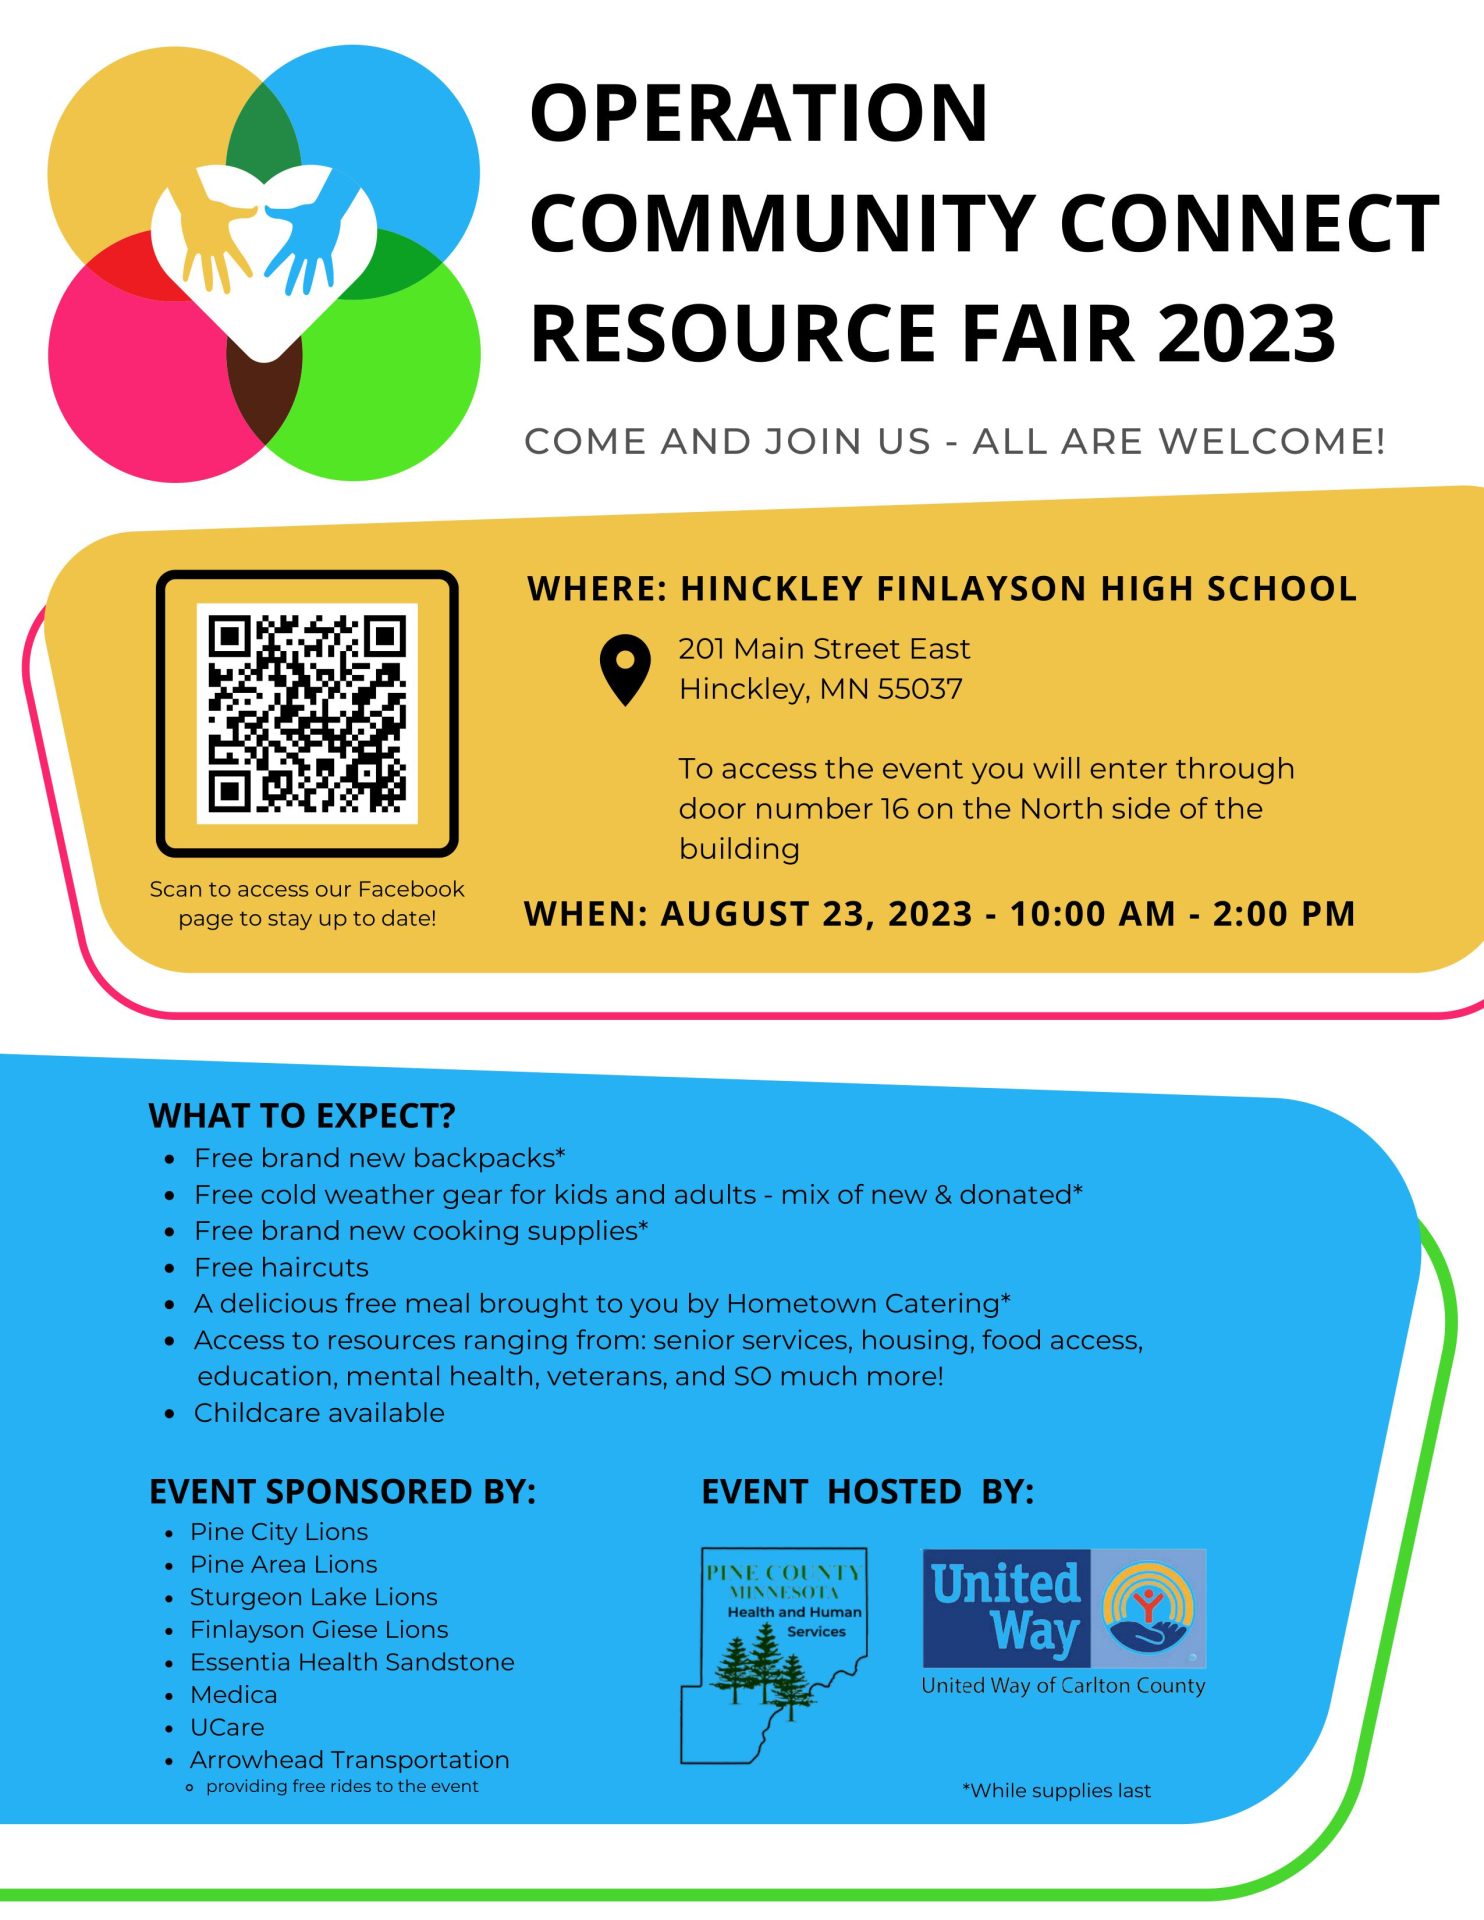 Operation Community Connect Resource Fair 2023